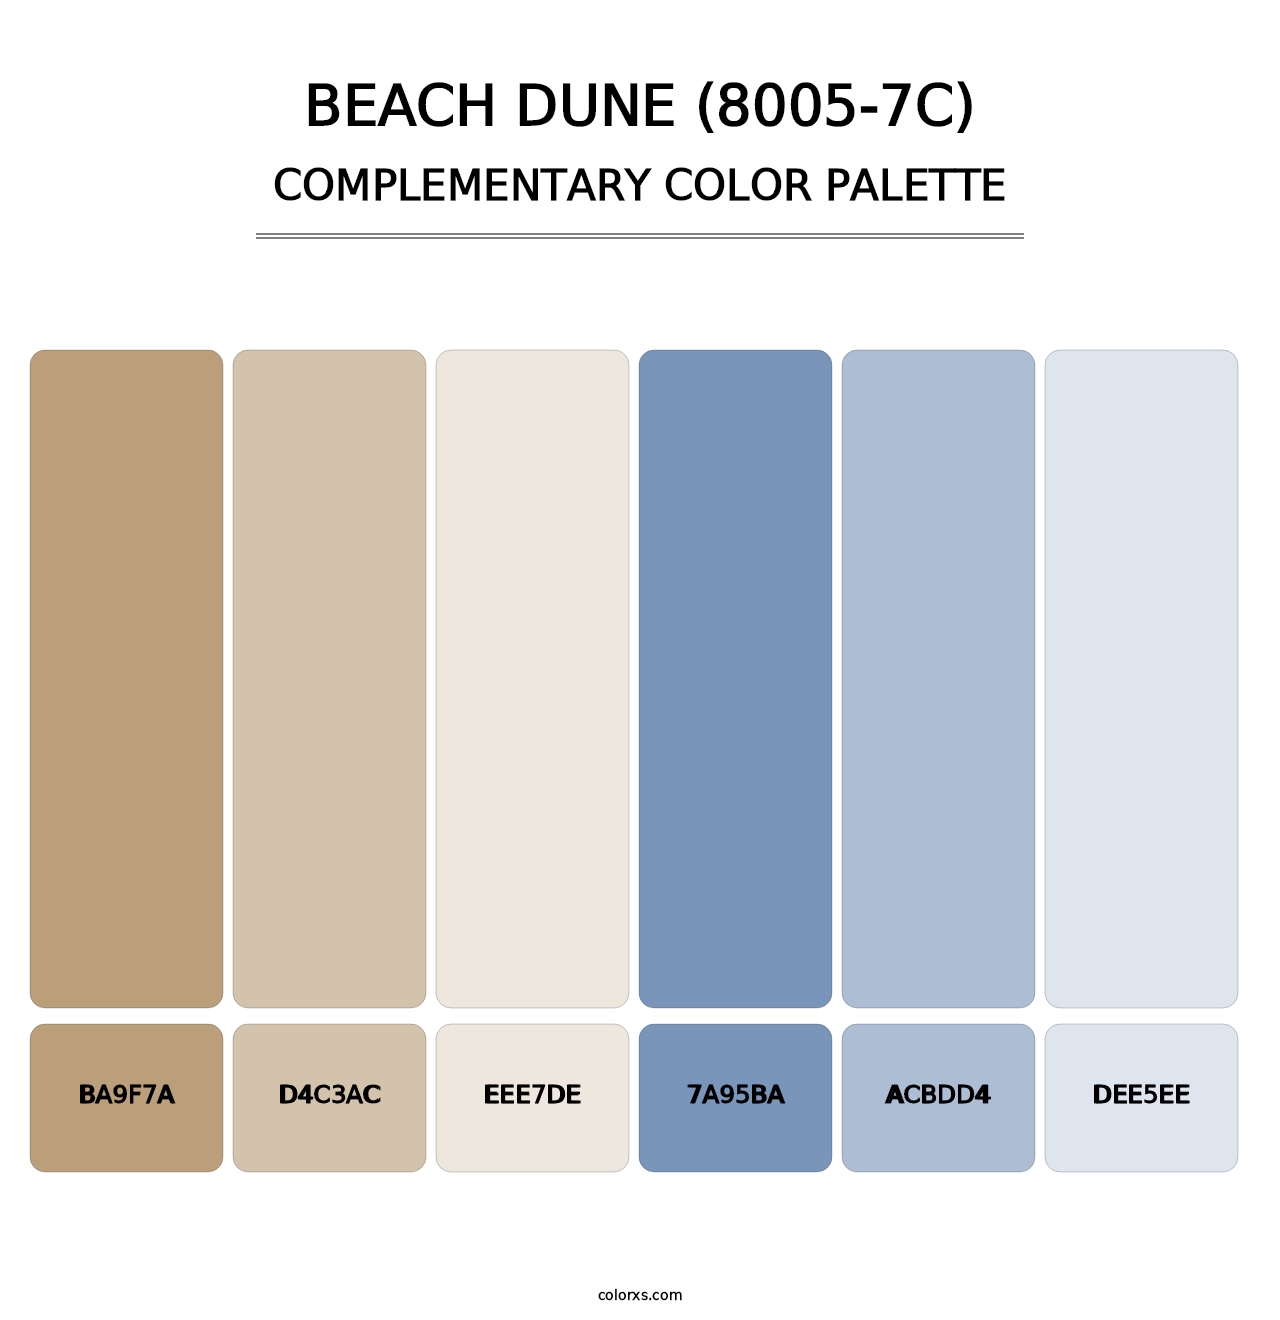 Beach Dune (8005-7C) - Complementary Color Palette